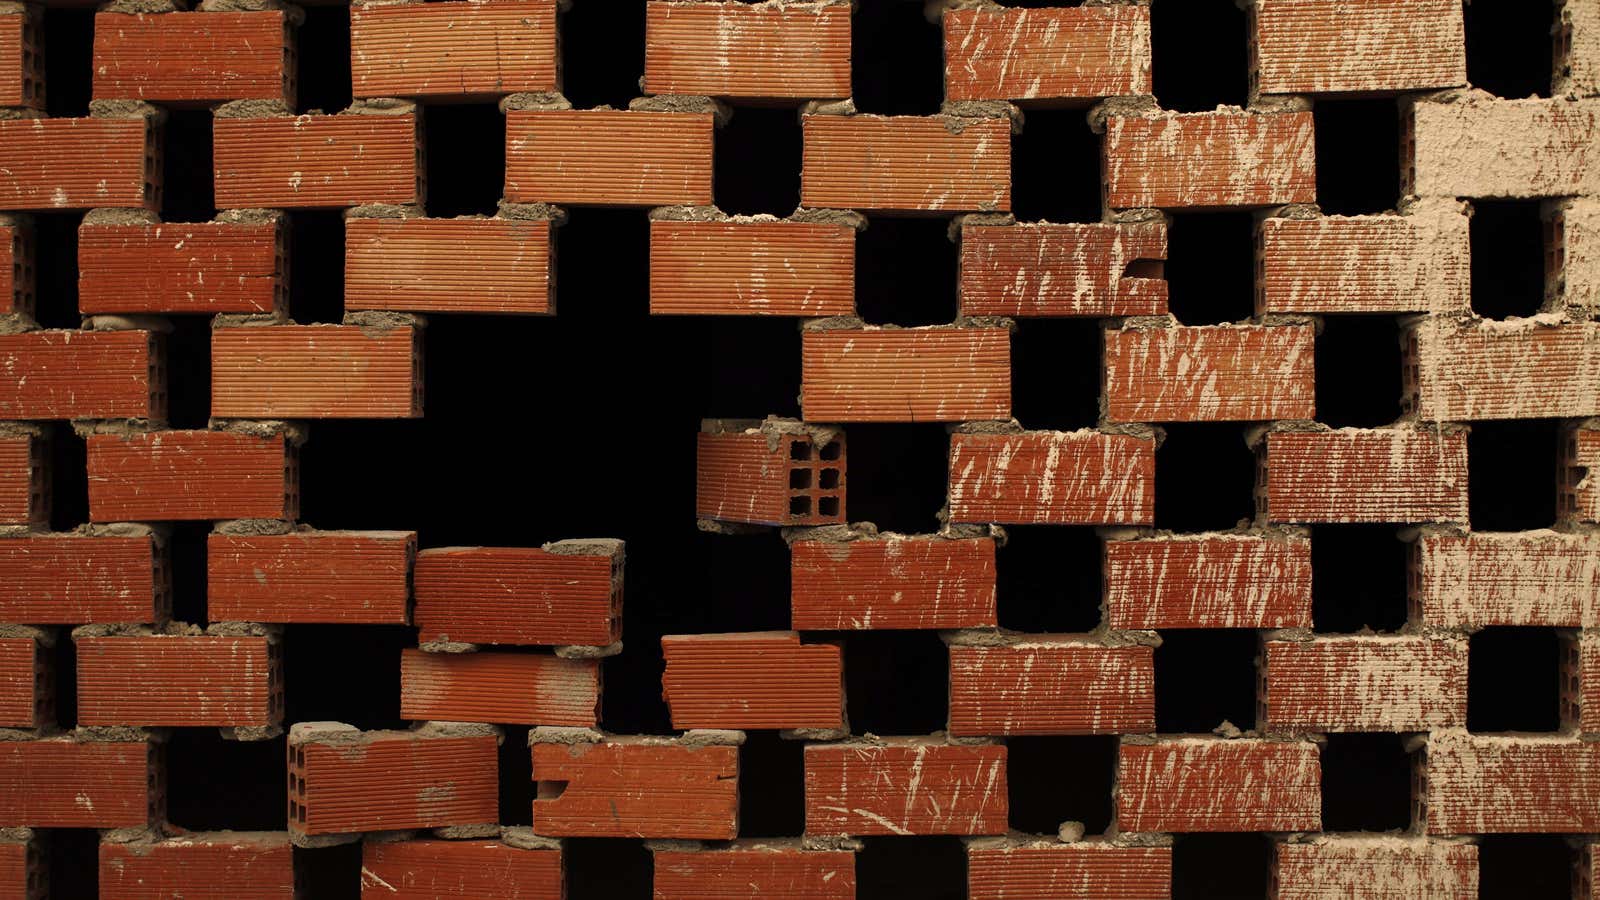 An unfinished brick wall is seen at a site where construction was halted after a lack of funding due to the financial crisis, in Alora, near Malaga, southern Spain May 4, 2011. REUTERS/Jon Nazca (SPAIN – Tags: BUSINESS CONSTRUCTION) – GM1E75501SR01